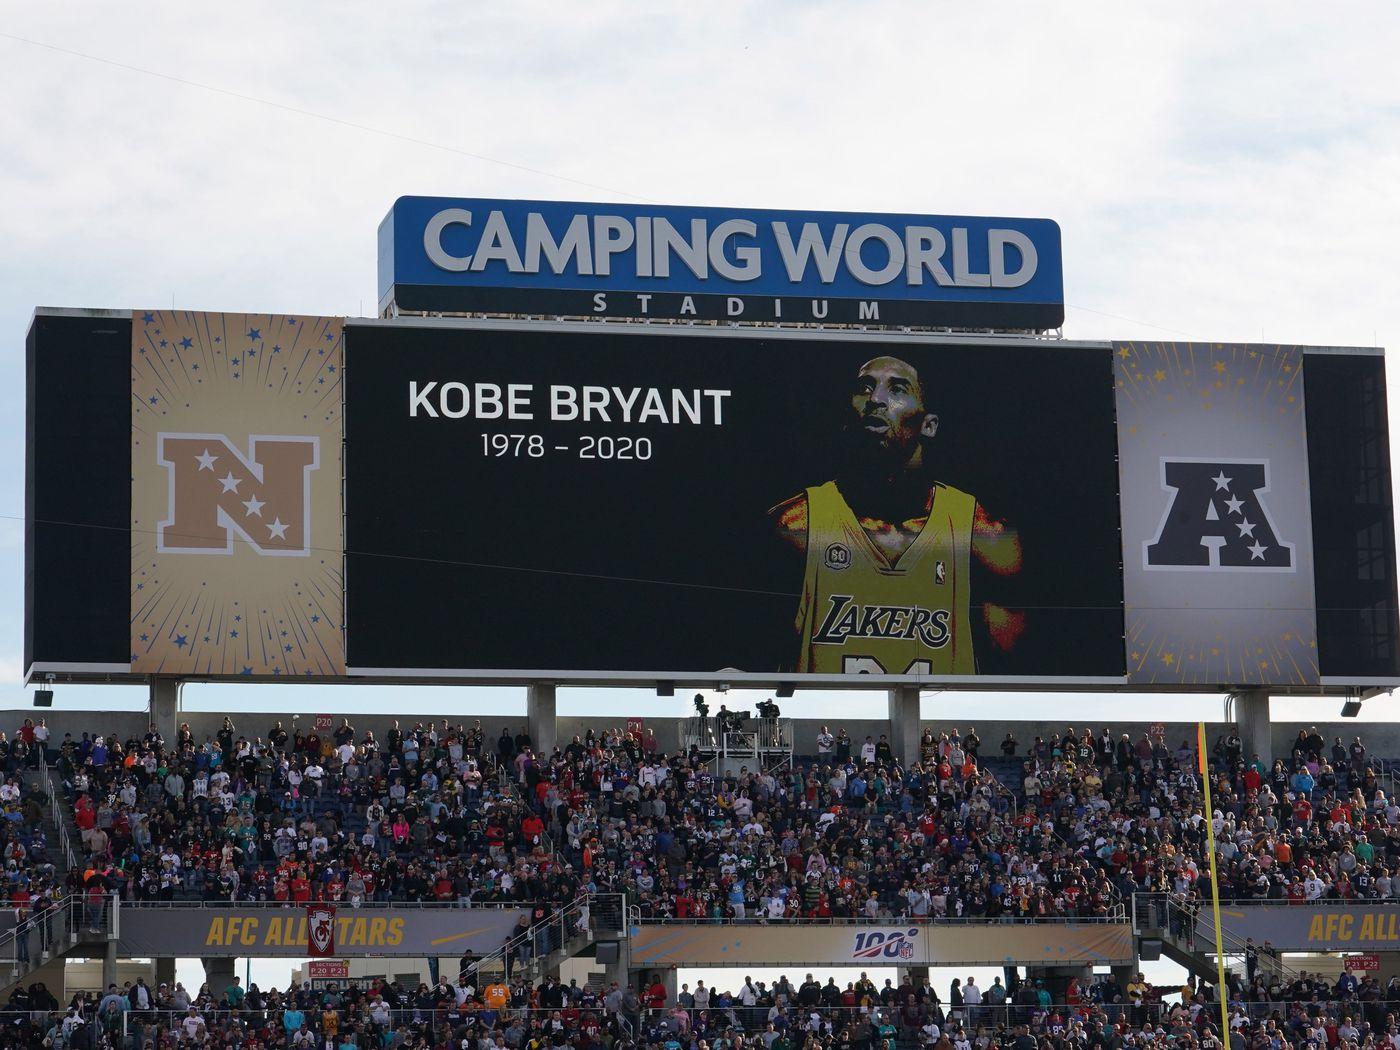 Rest in Peace, Kobe Bryant. Our hearts are with your family